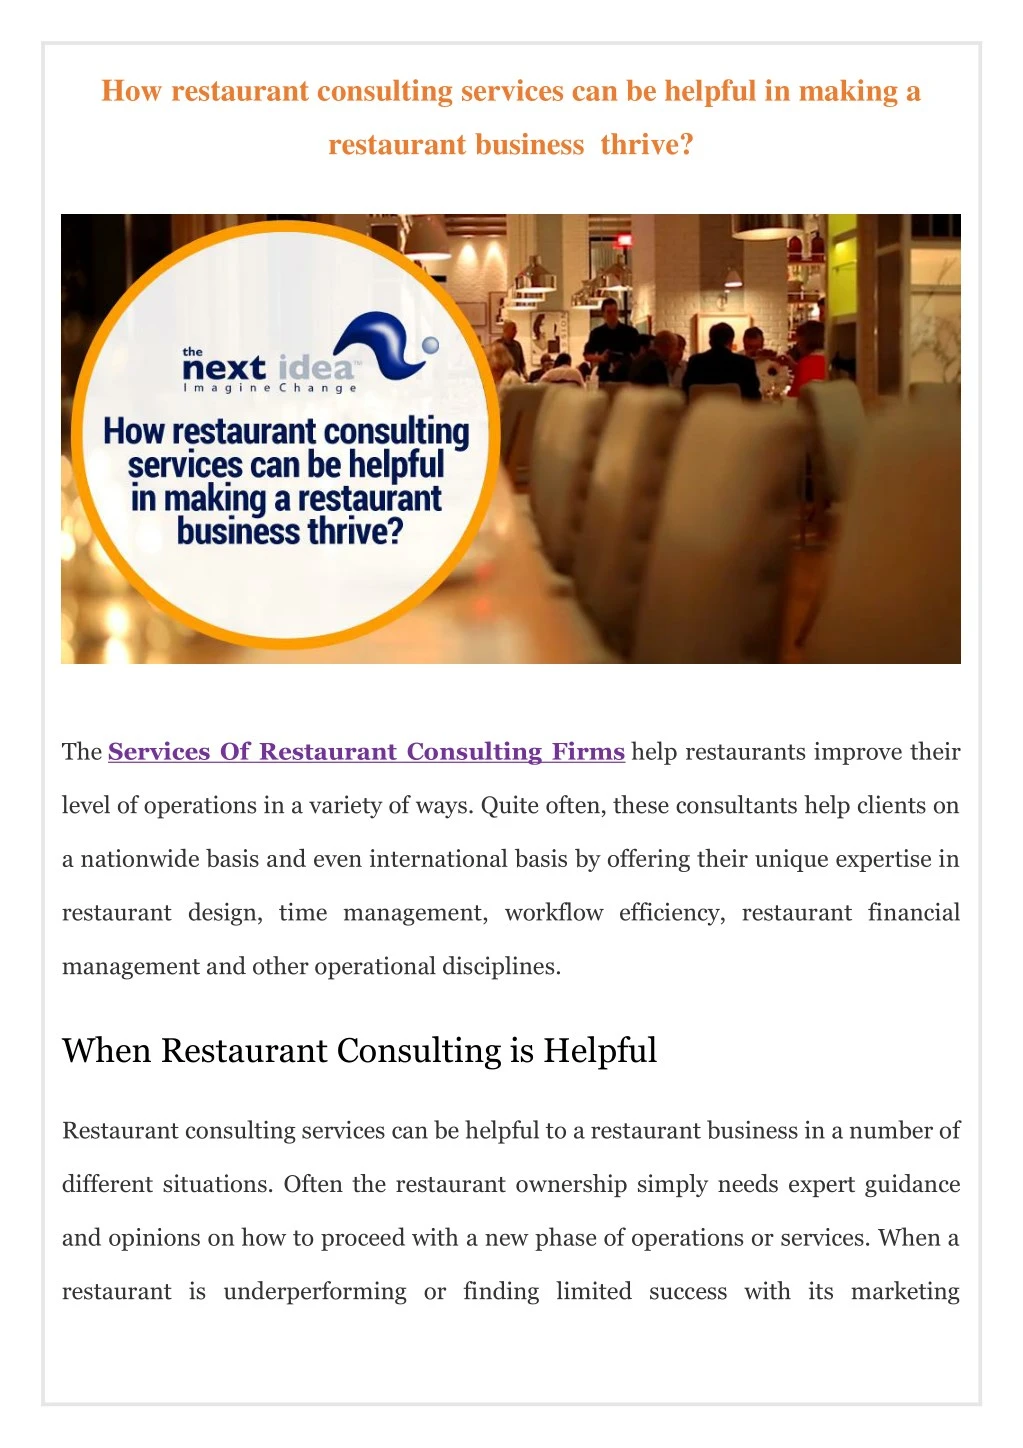 how restaurant consulting services can be helpful